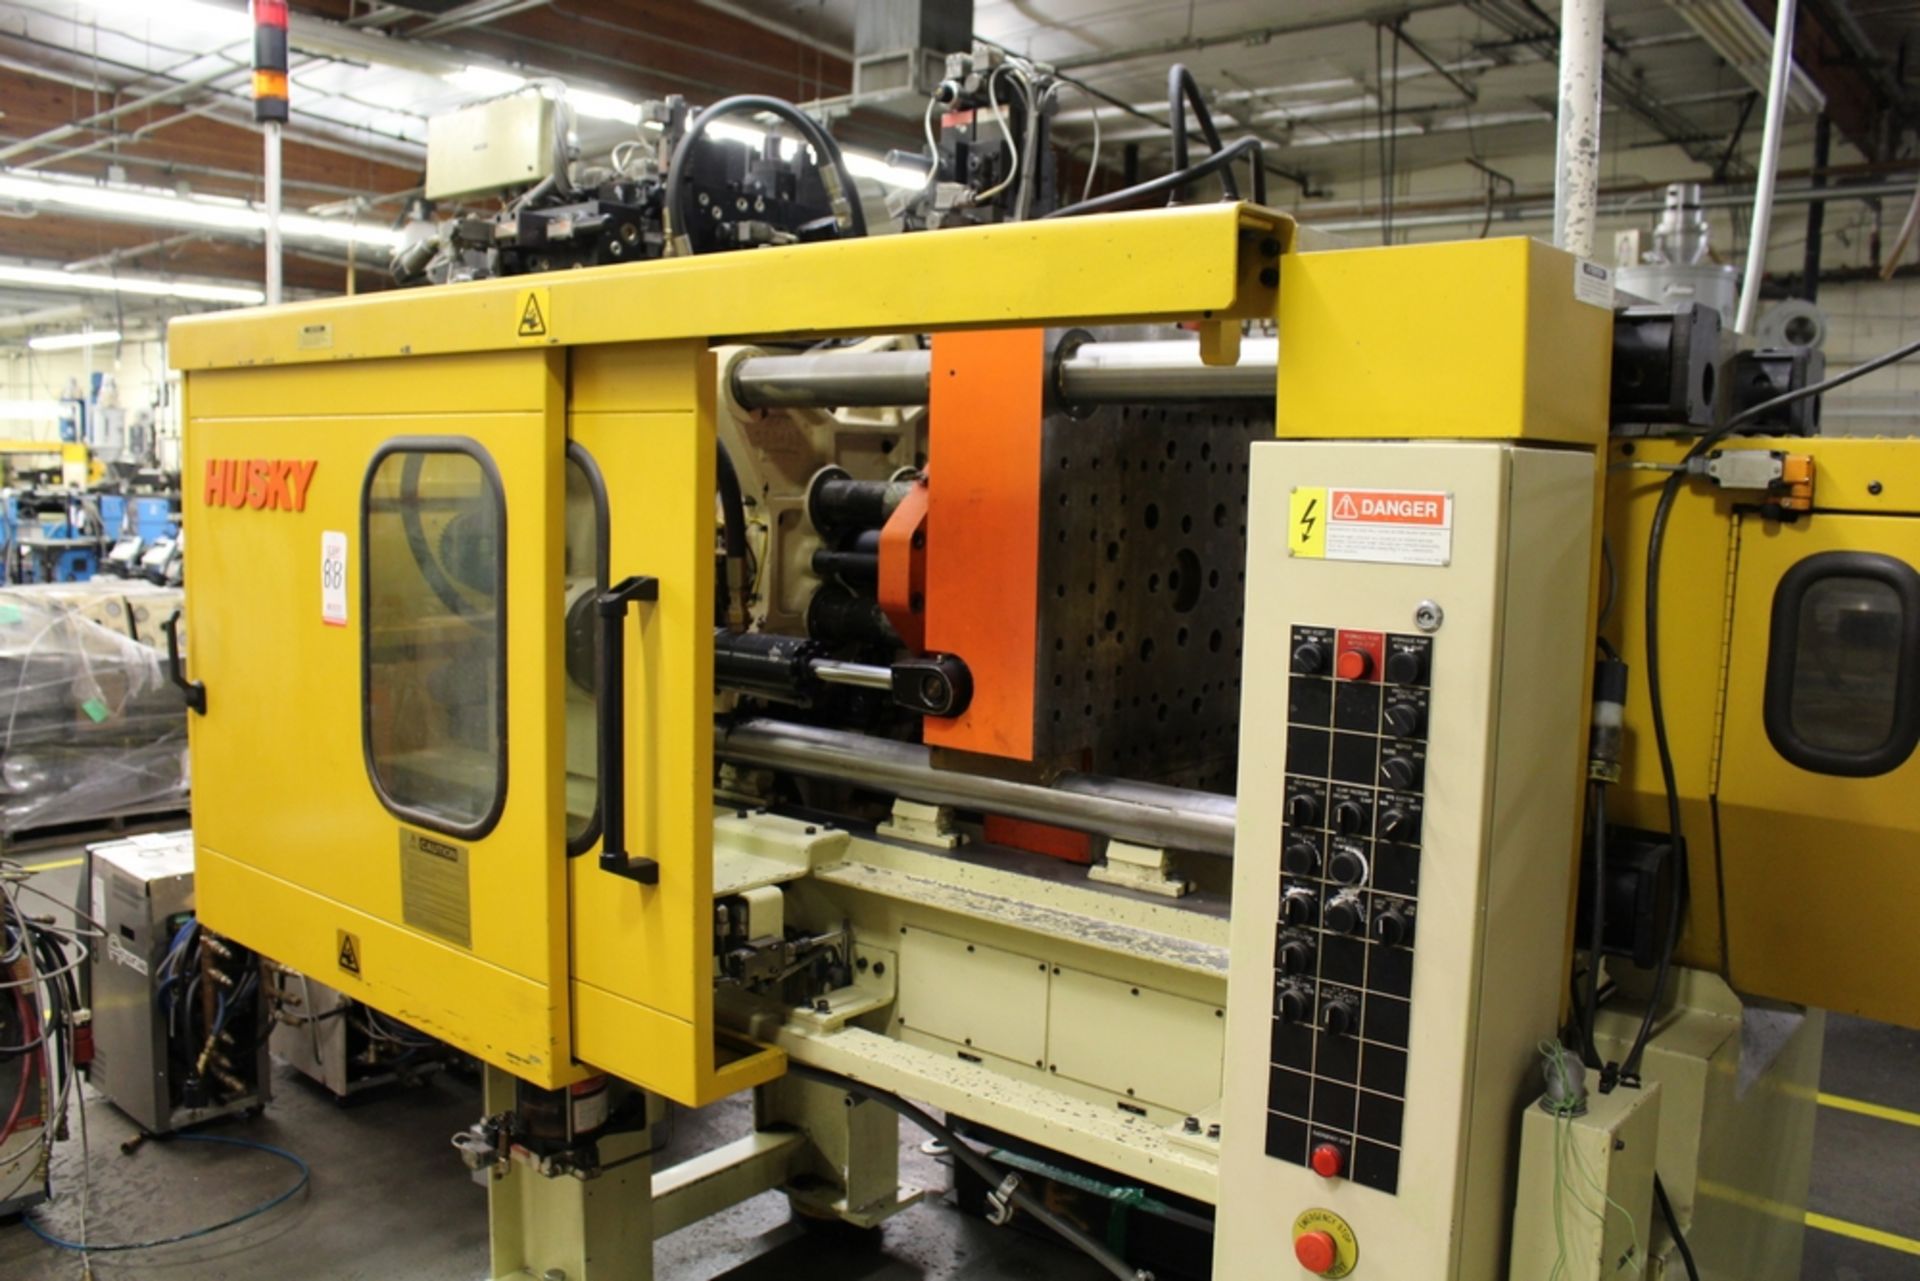 1995 HUSKY 225-TON INJECTION MOLDING MACHINE, MODEL CX160 RS42/42, S/N 11831, 31.5" X 31.5" PLATENS, - Image 5 of 8